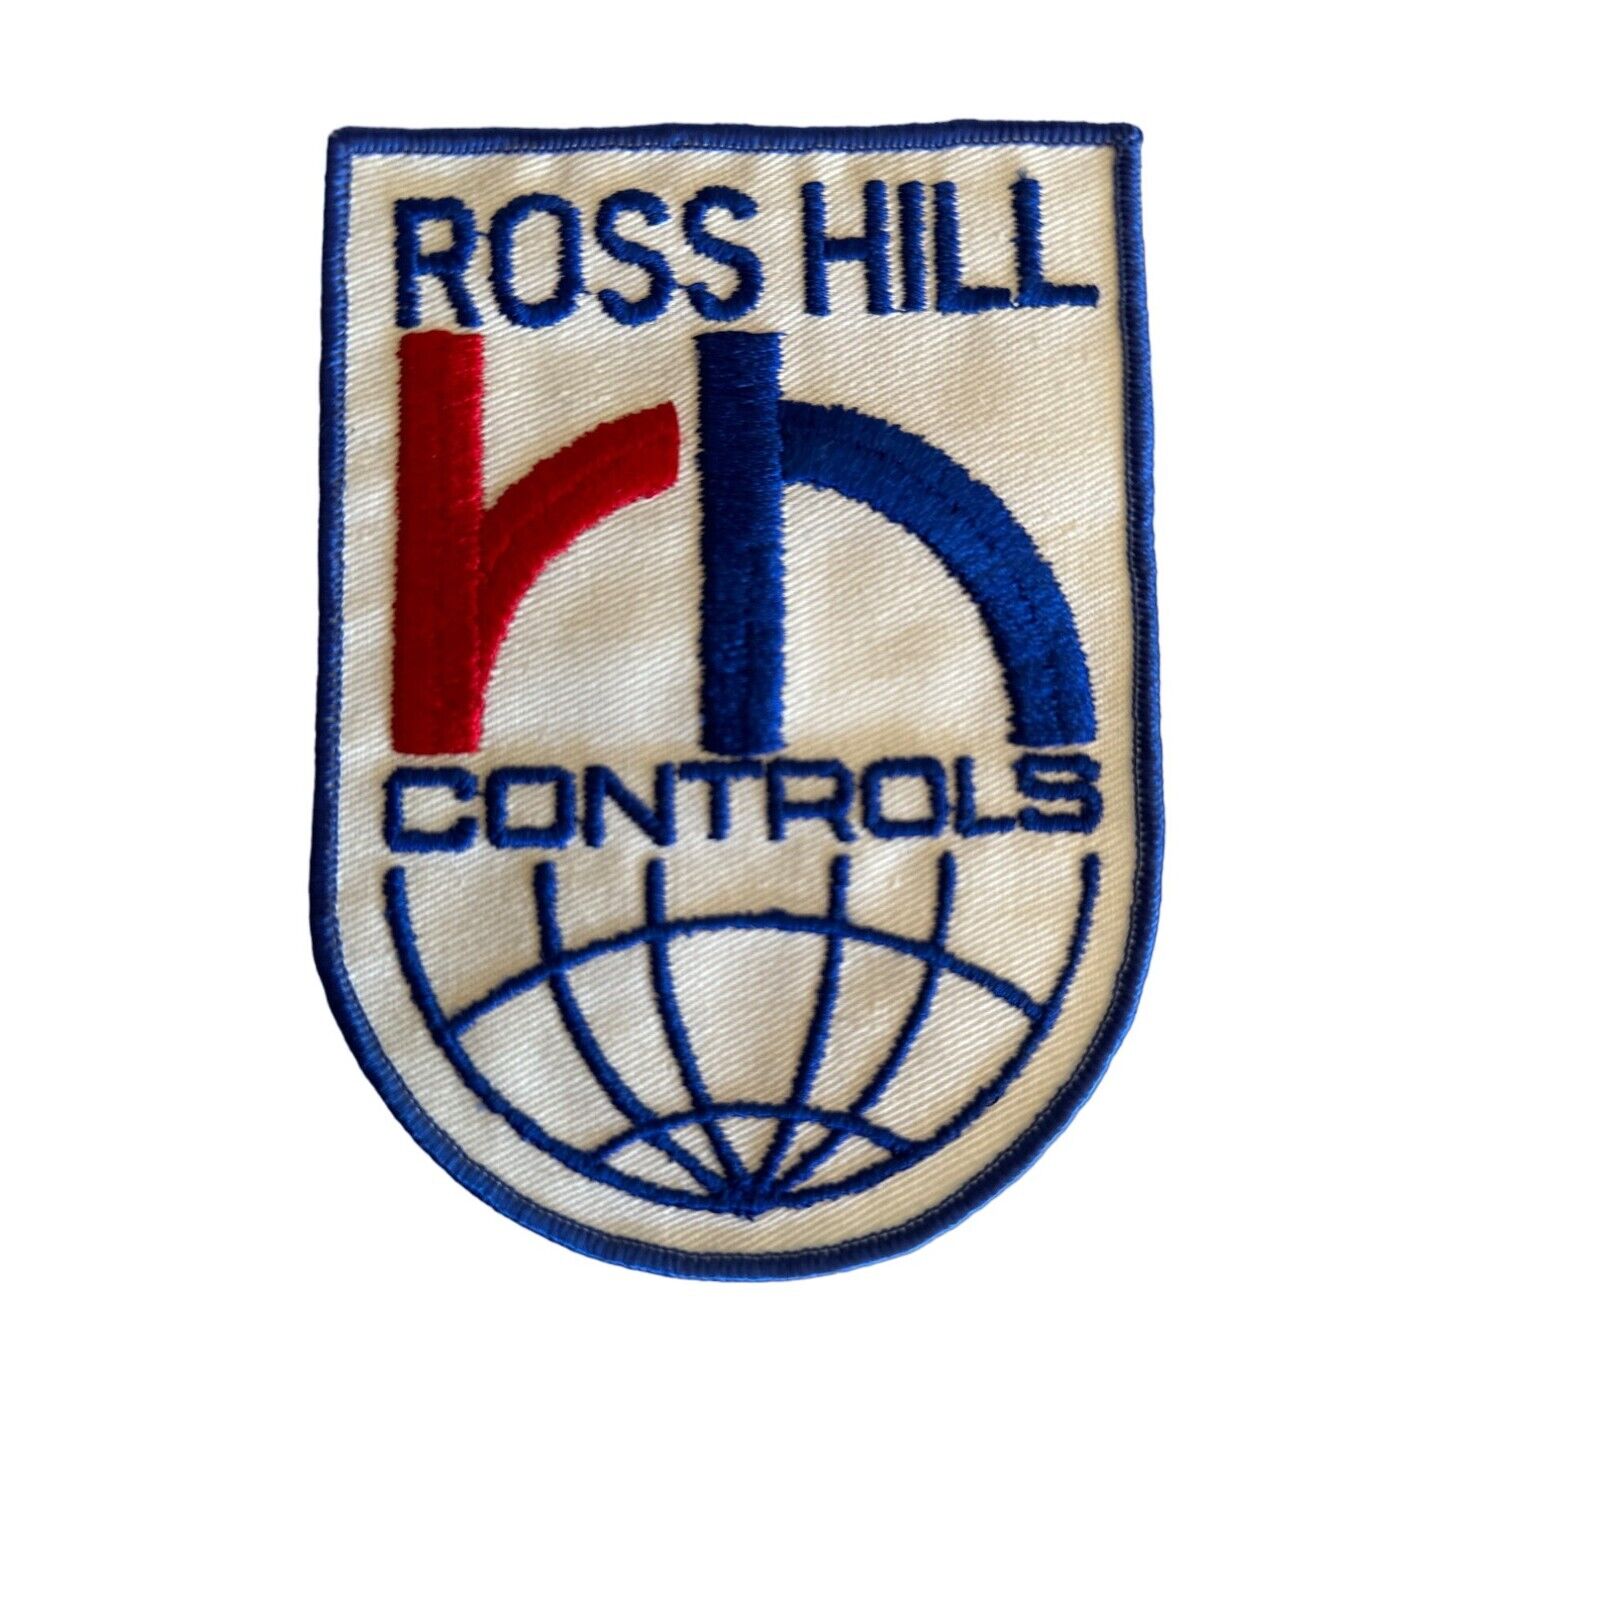 Ross Hill Controls Red White Blue Racing Uniform Patch